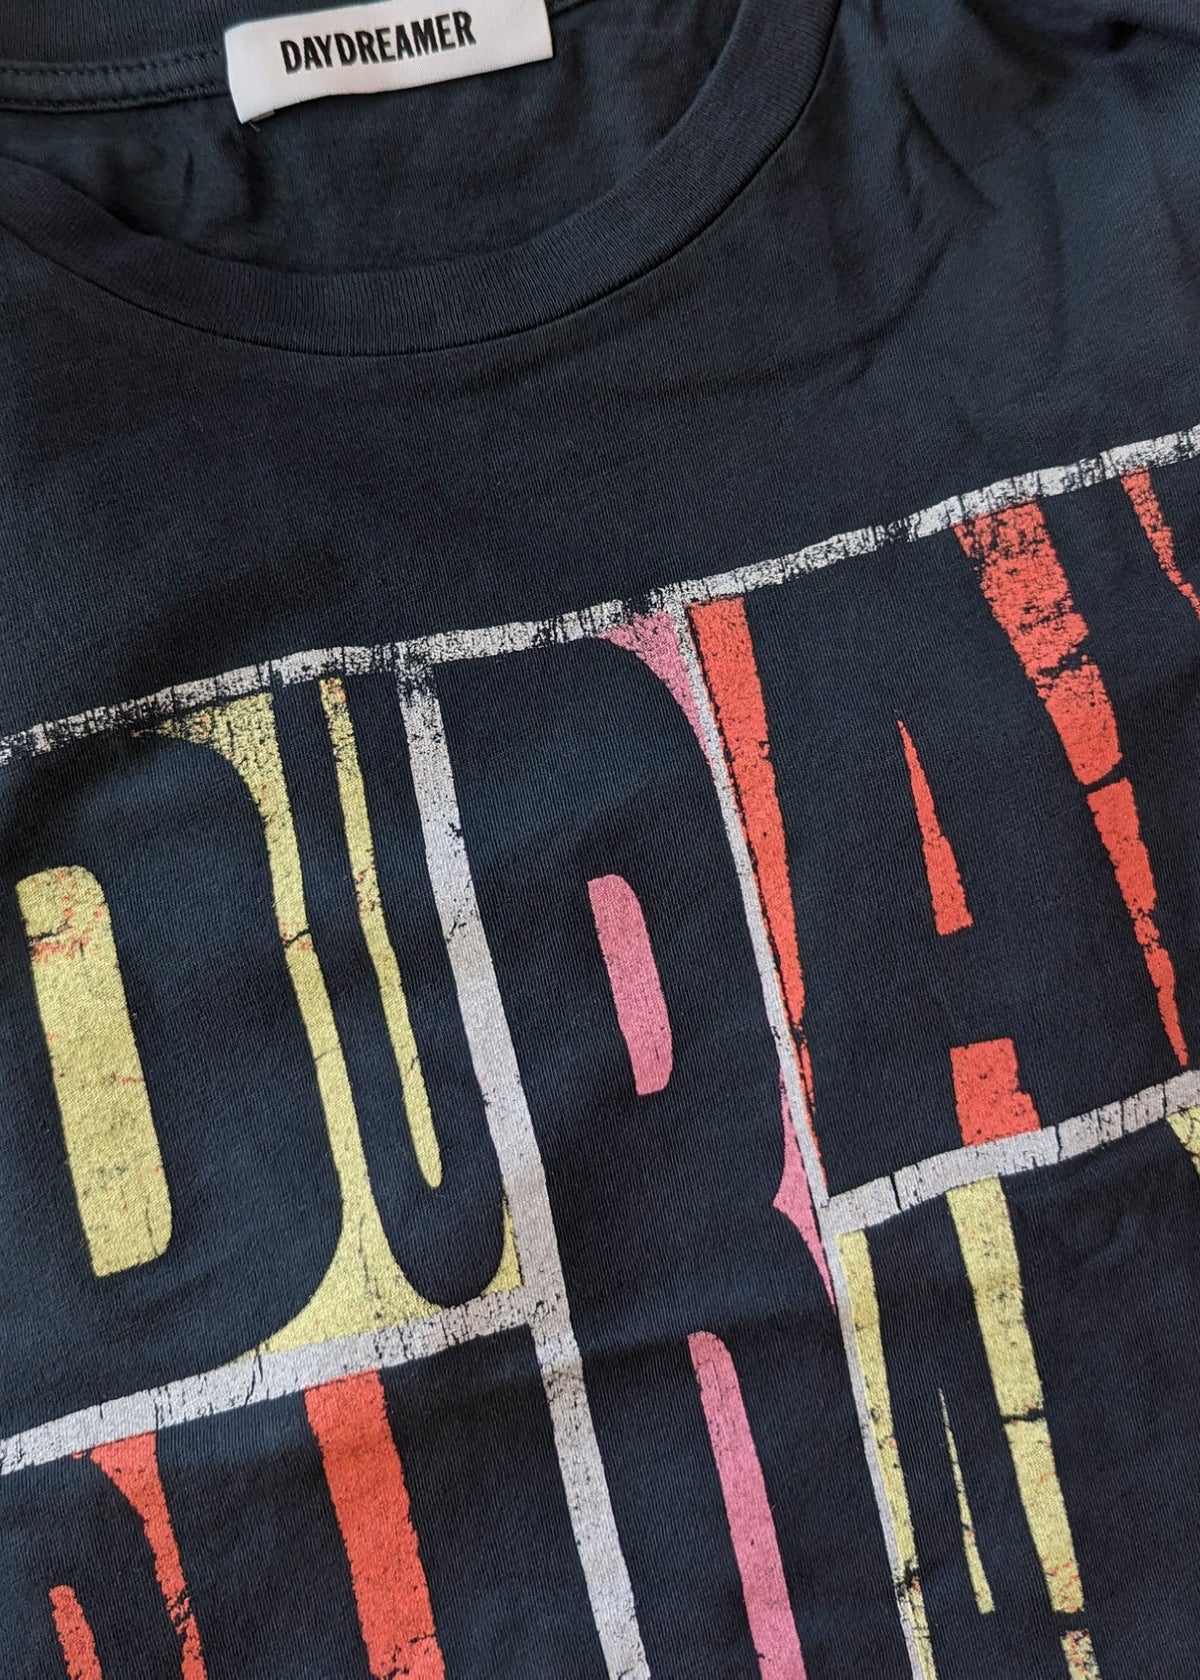 Duran Duran Abstract Idealist Romantic Big Thing Tour tee by Daydreamer LA, officially licensed and made in California